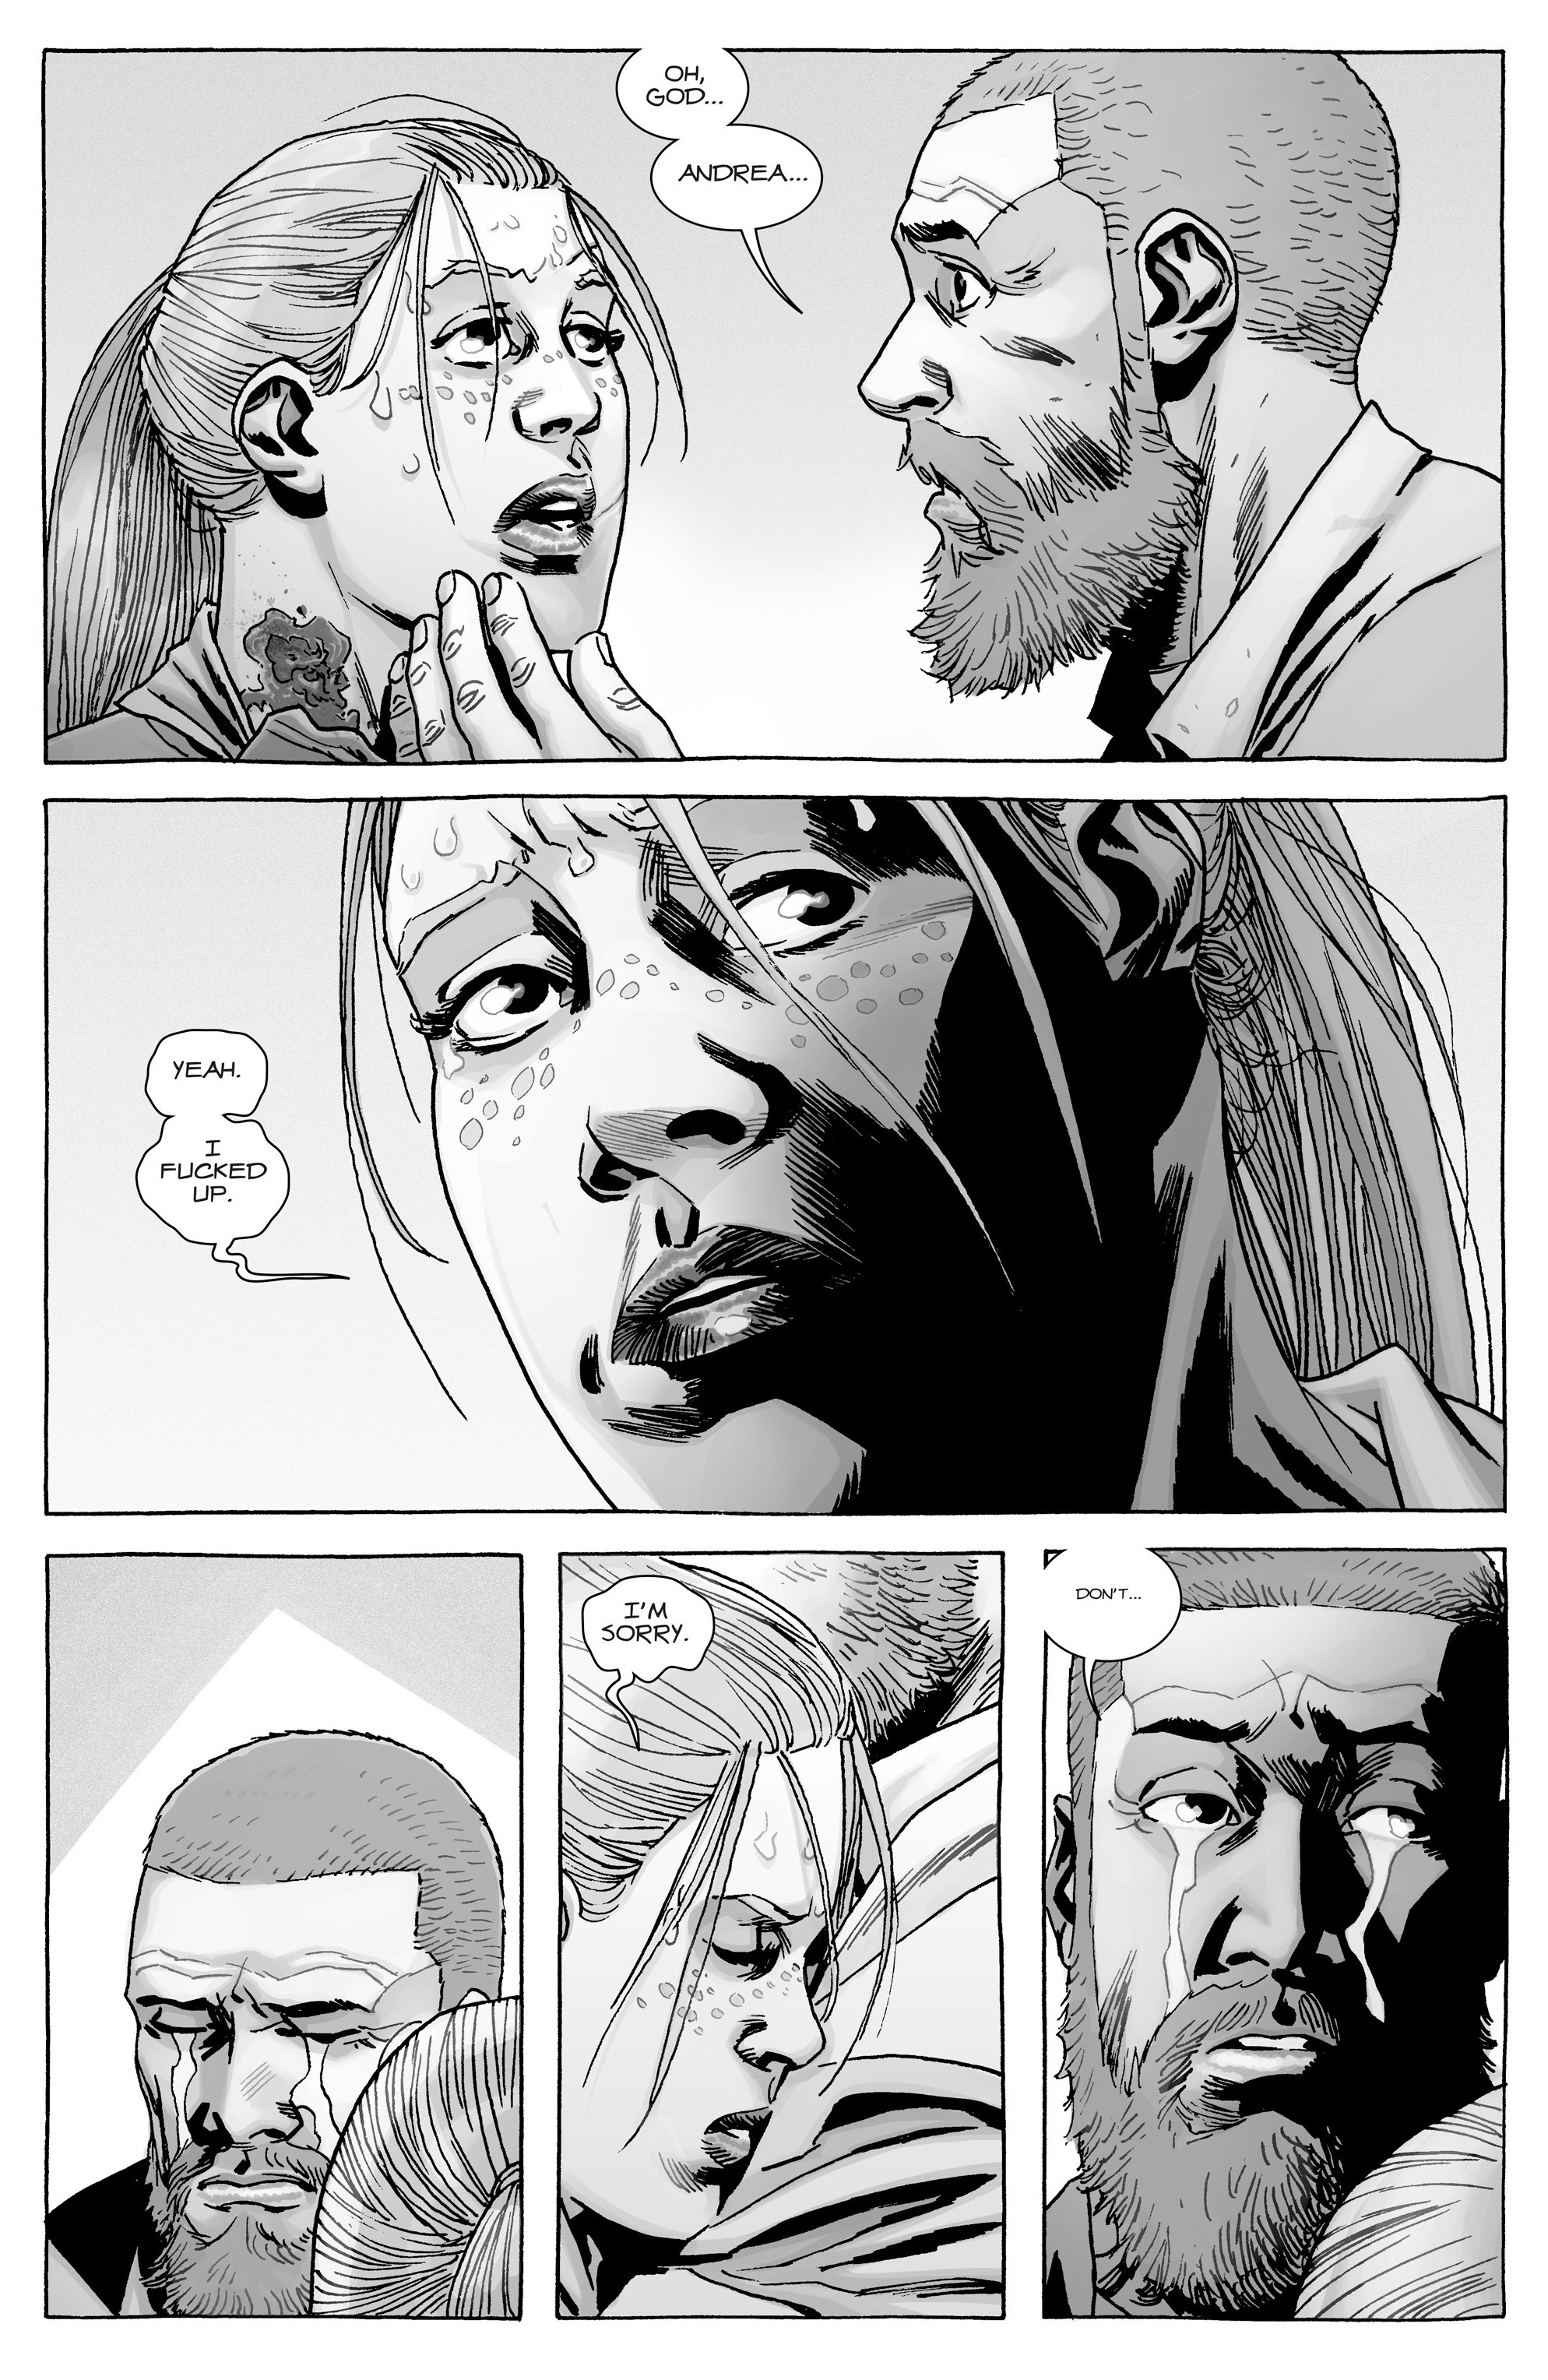 The Walking Dead (2003-): Chapter 167 - Page 3